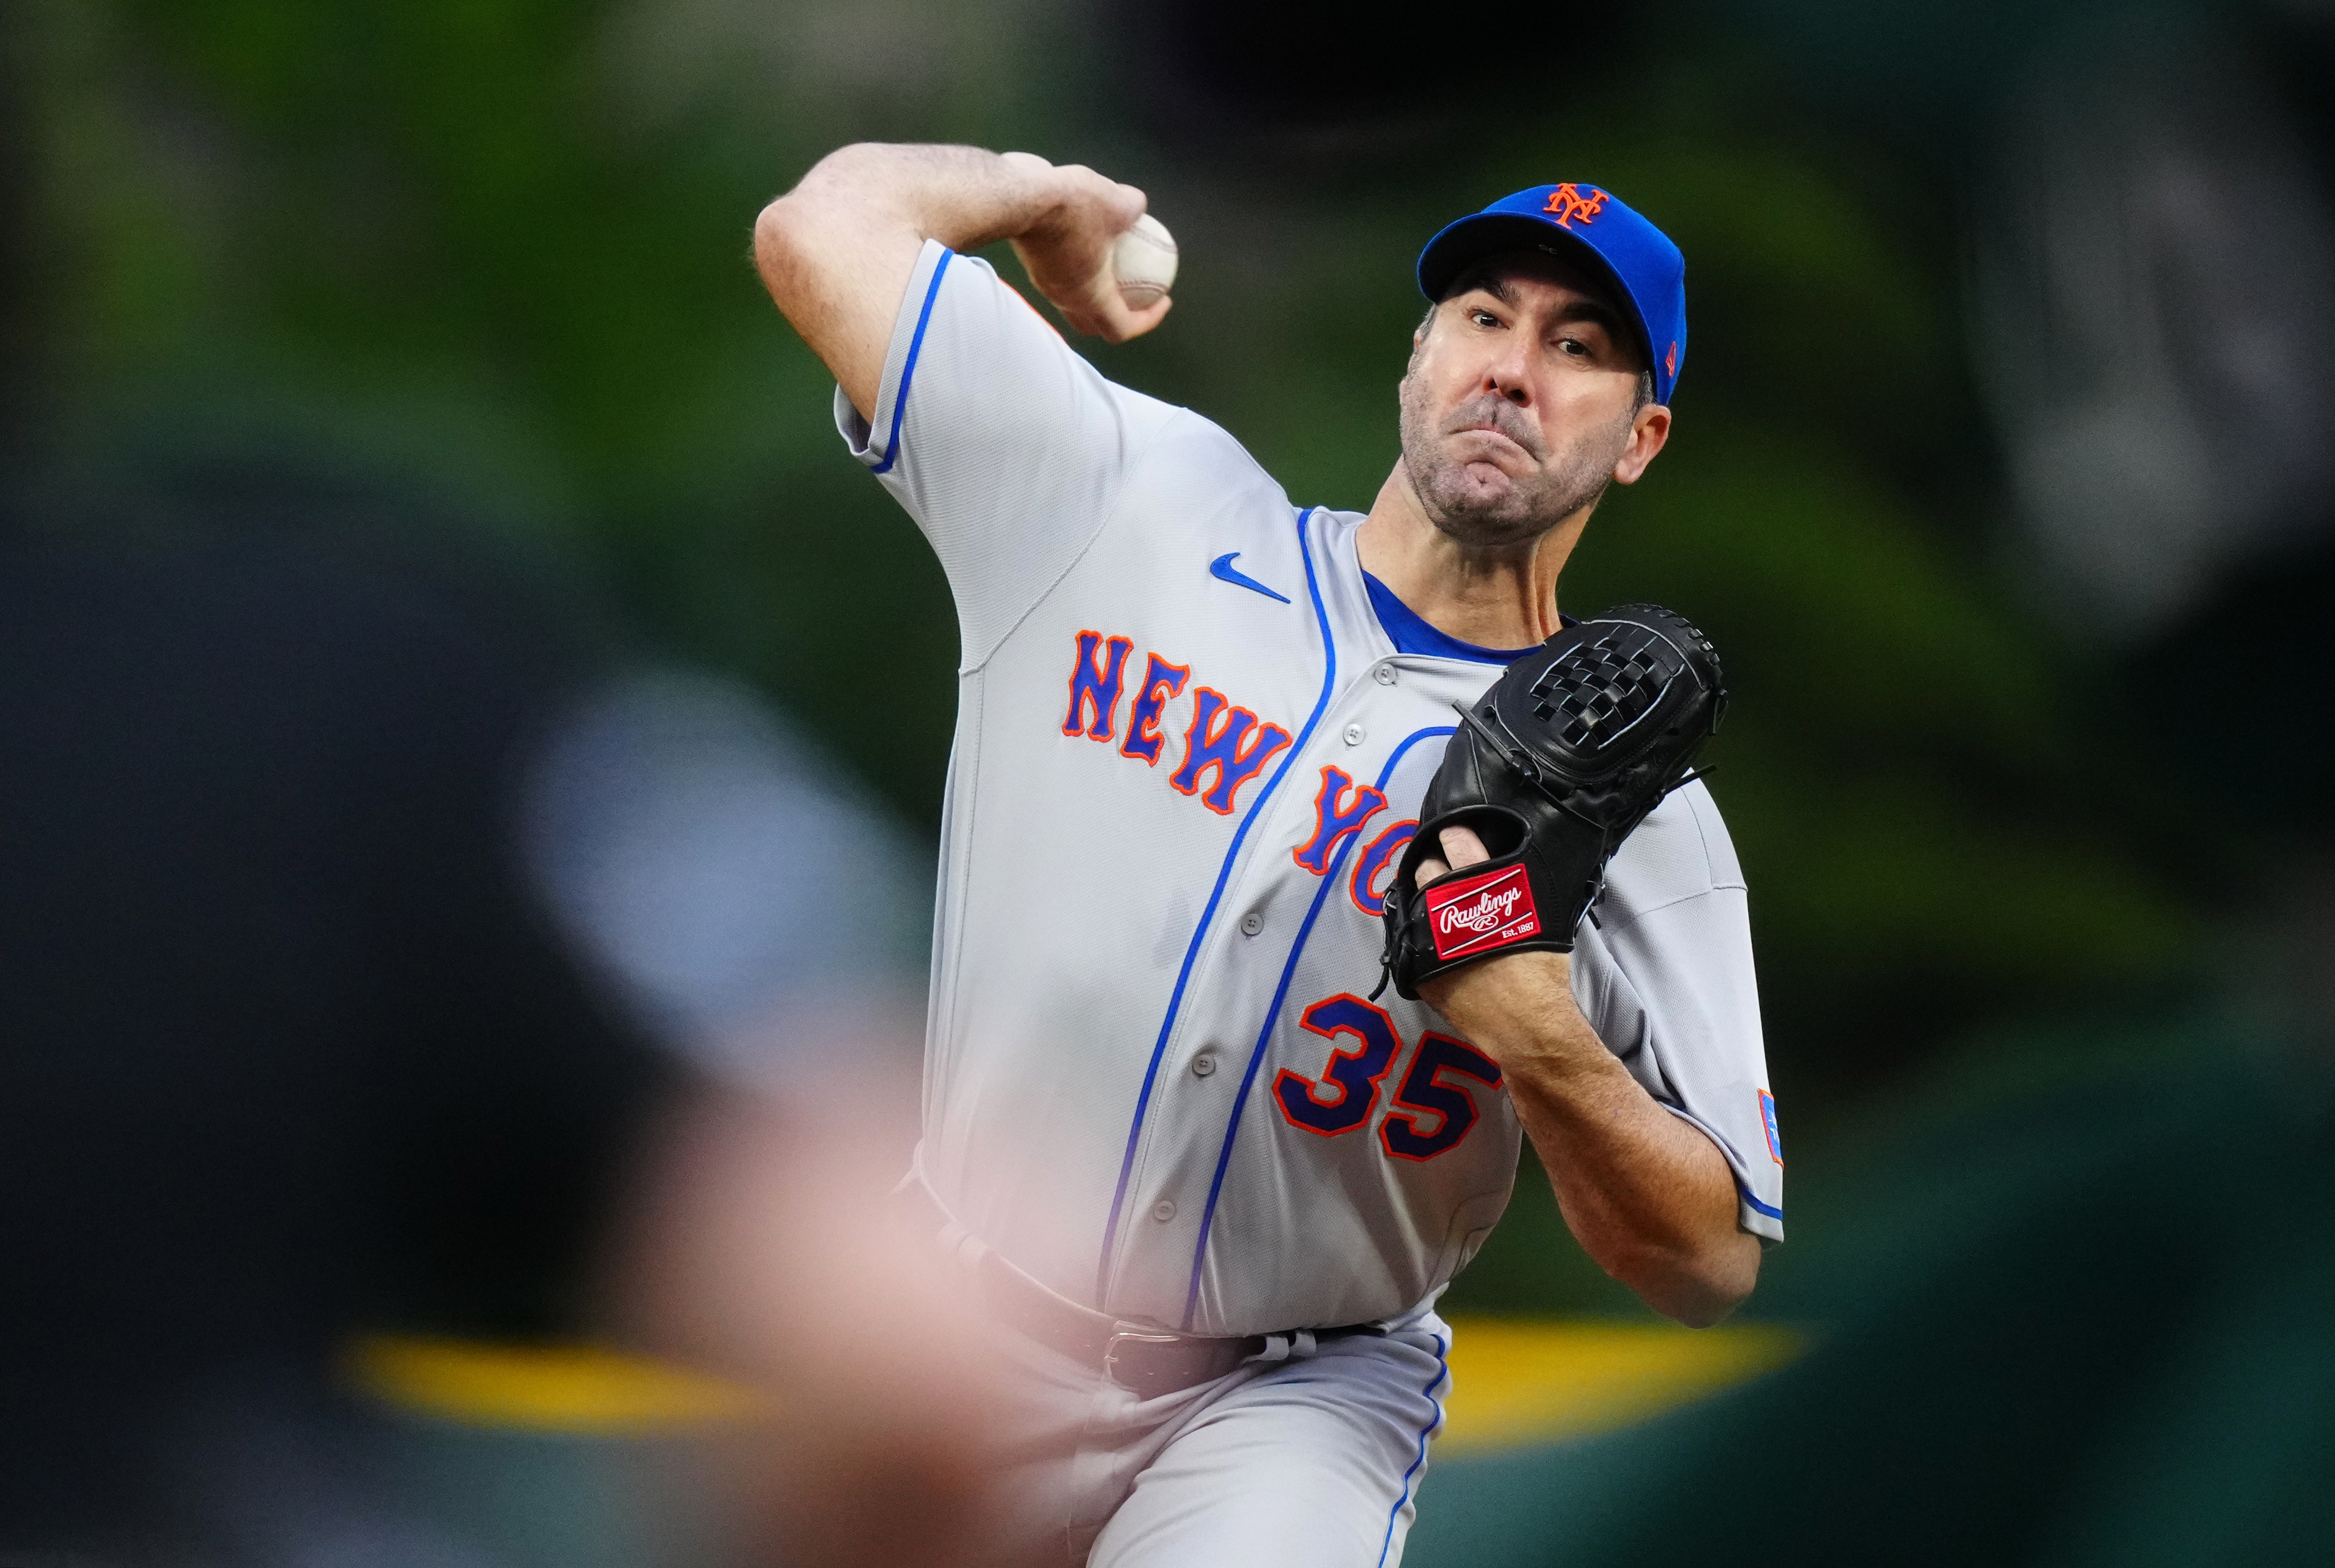 NY Mets rally in ninth to beat Colorado Rockies